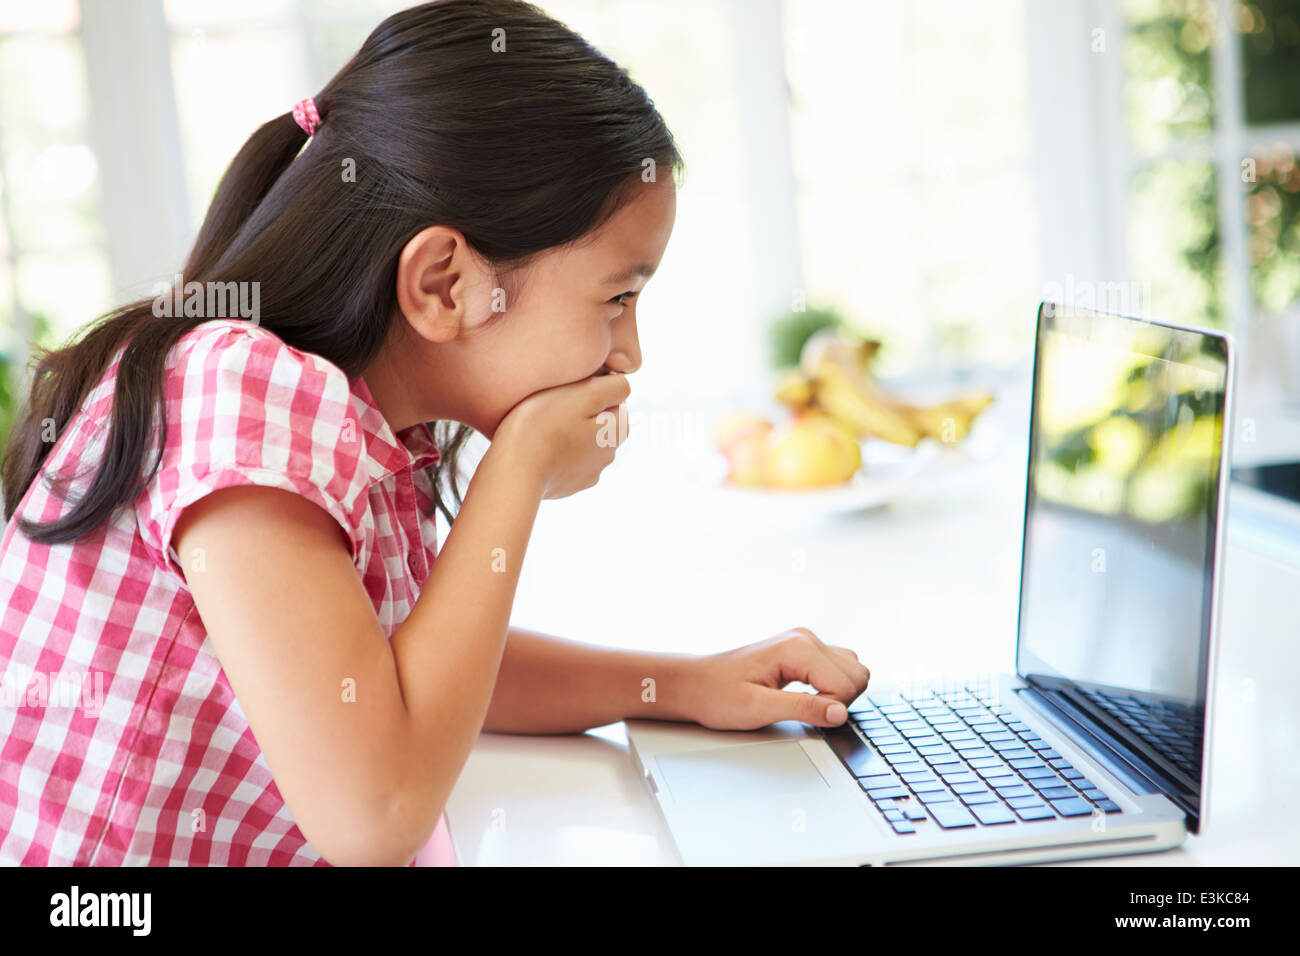 Shocked Asian Child Using Laptop At Home Stock Photo